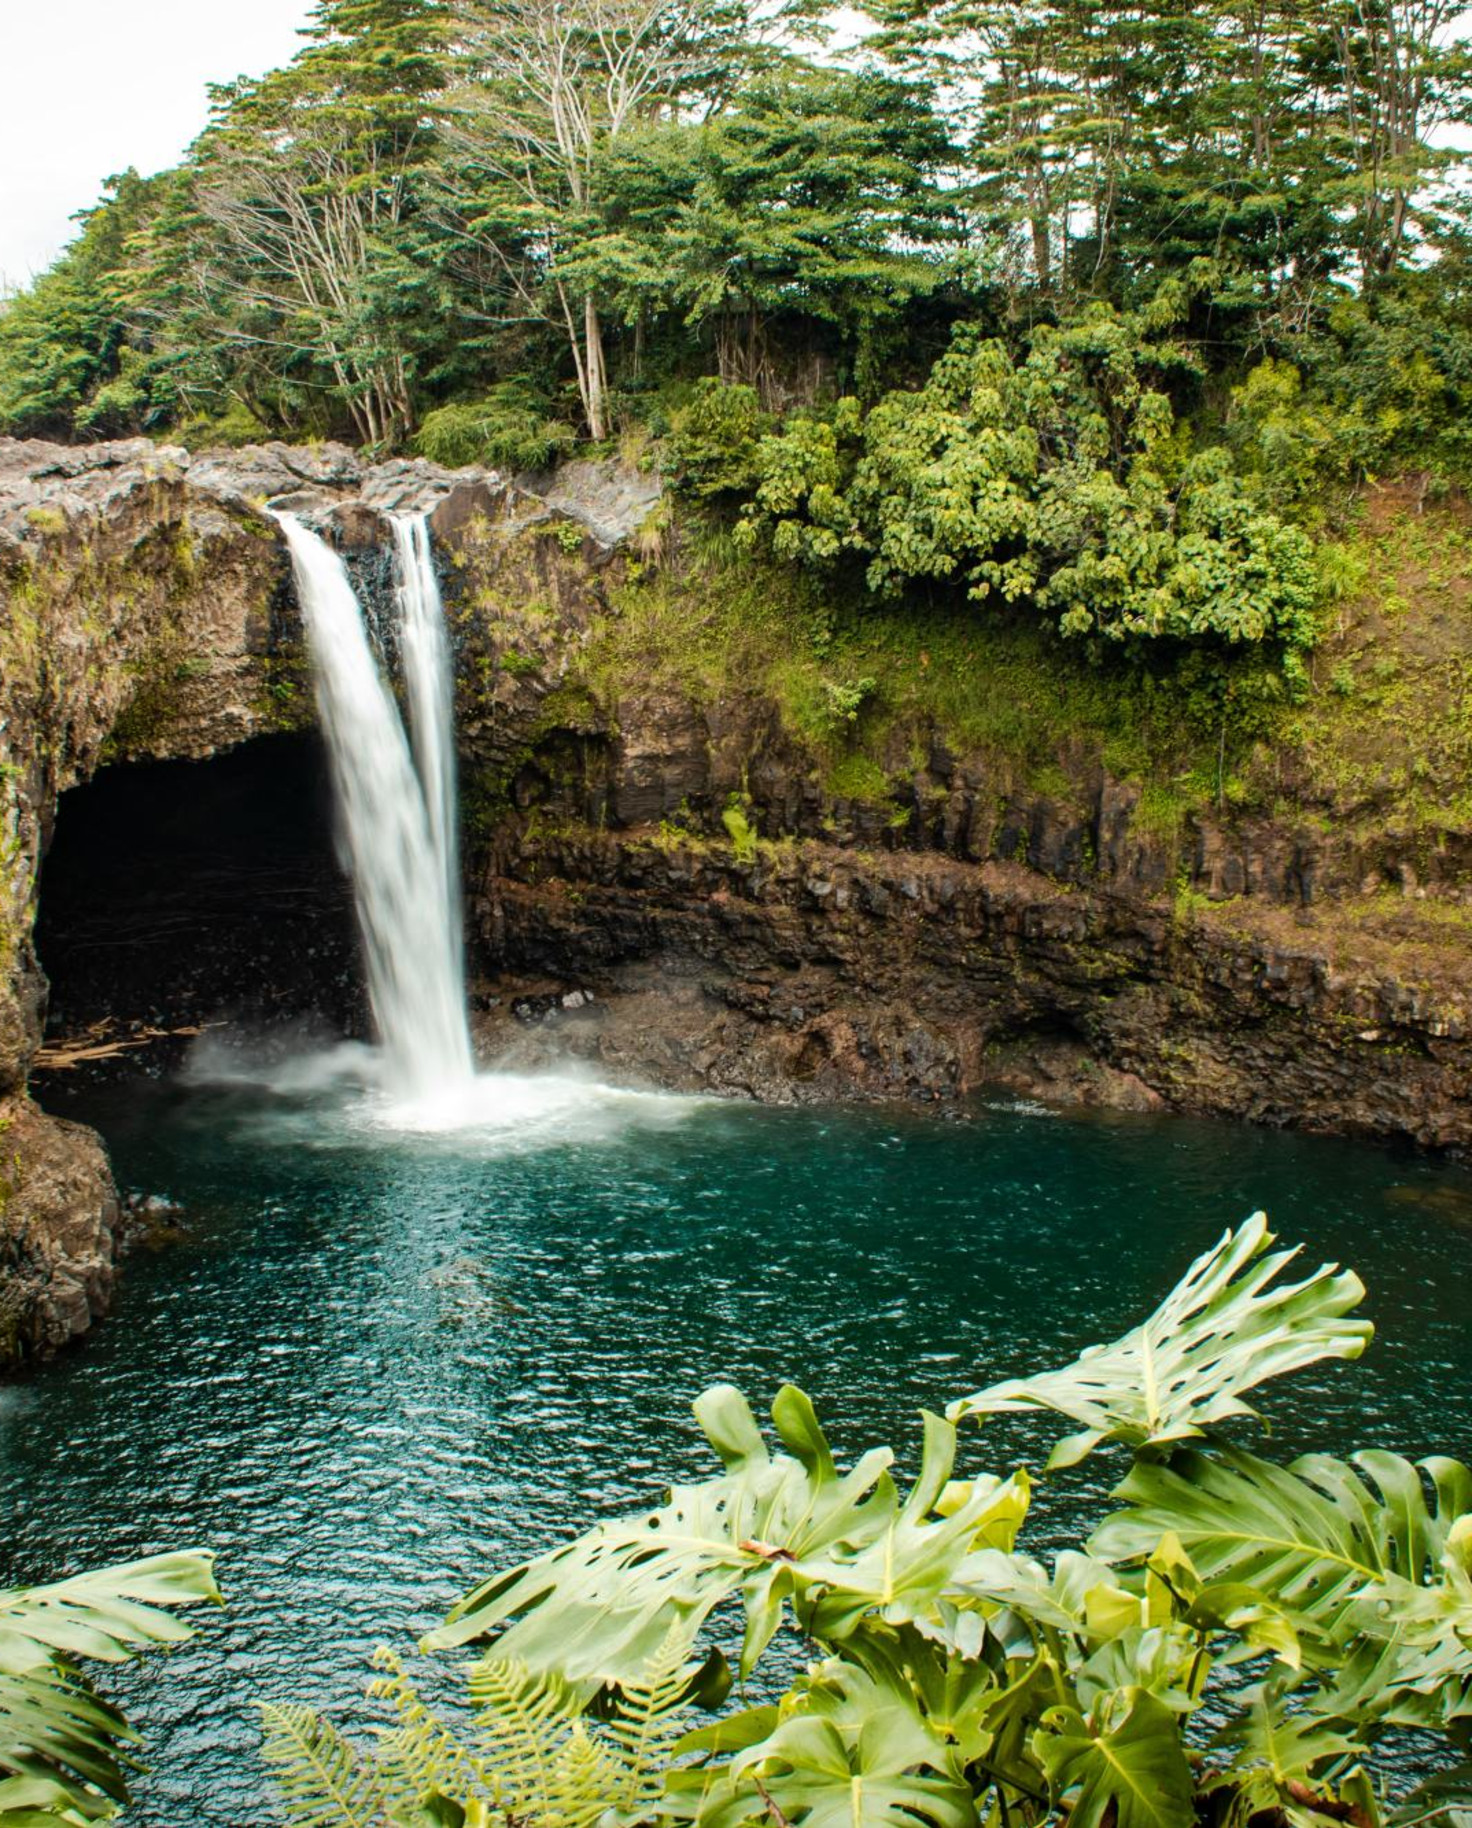 Private swimming hole surrounded by jungle with waterfall in Hilo, Hawaii.